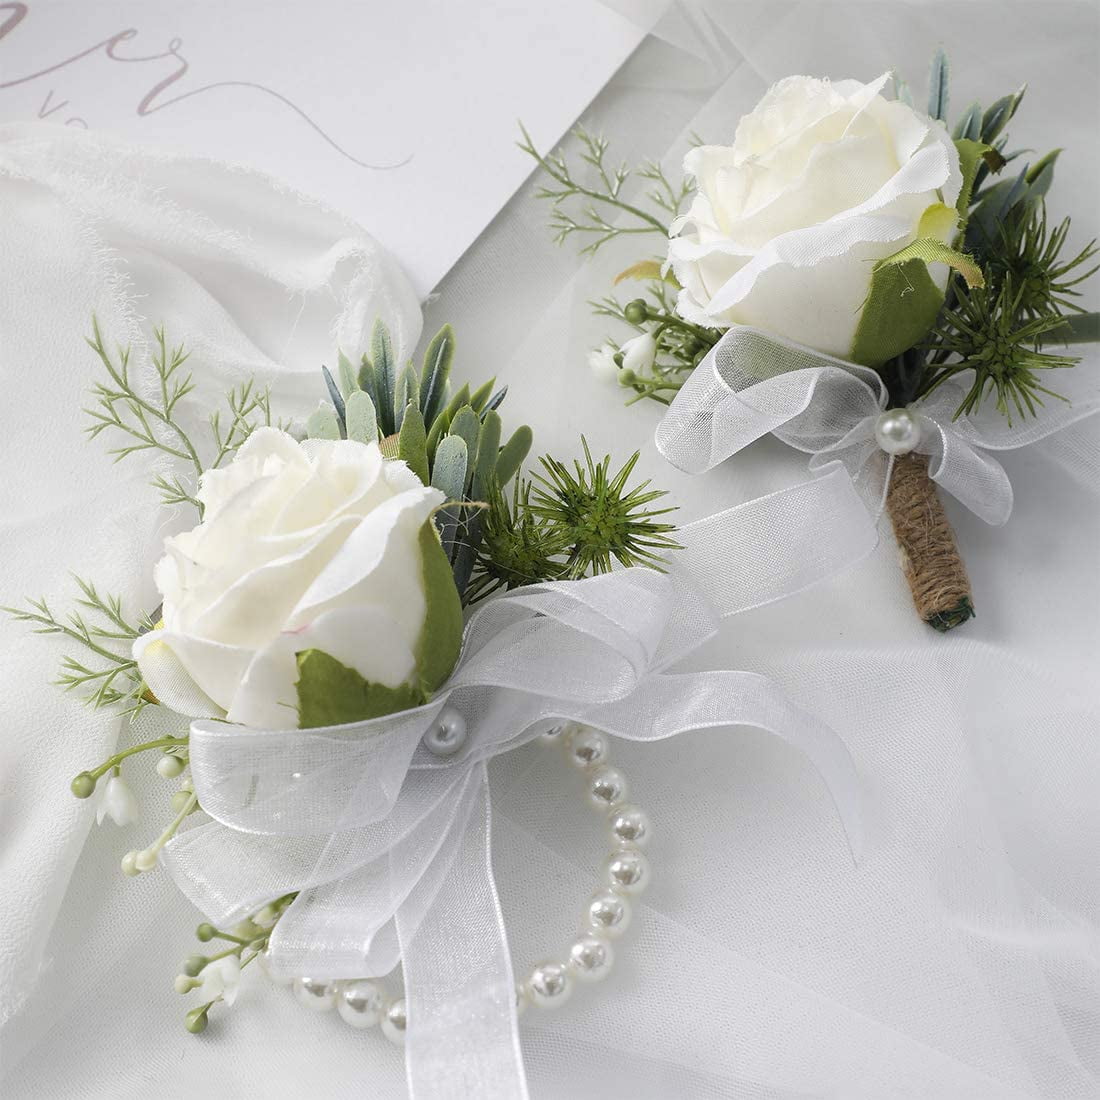 6"  Silk Corsage Flowers with Pearl Spray price for 1 piece select color 